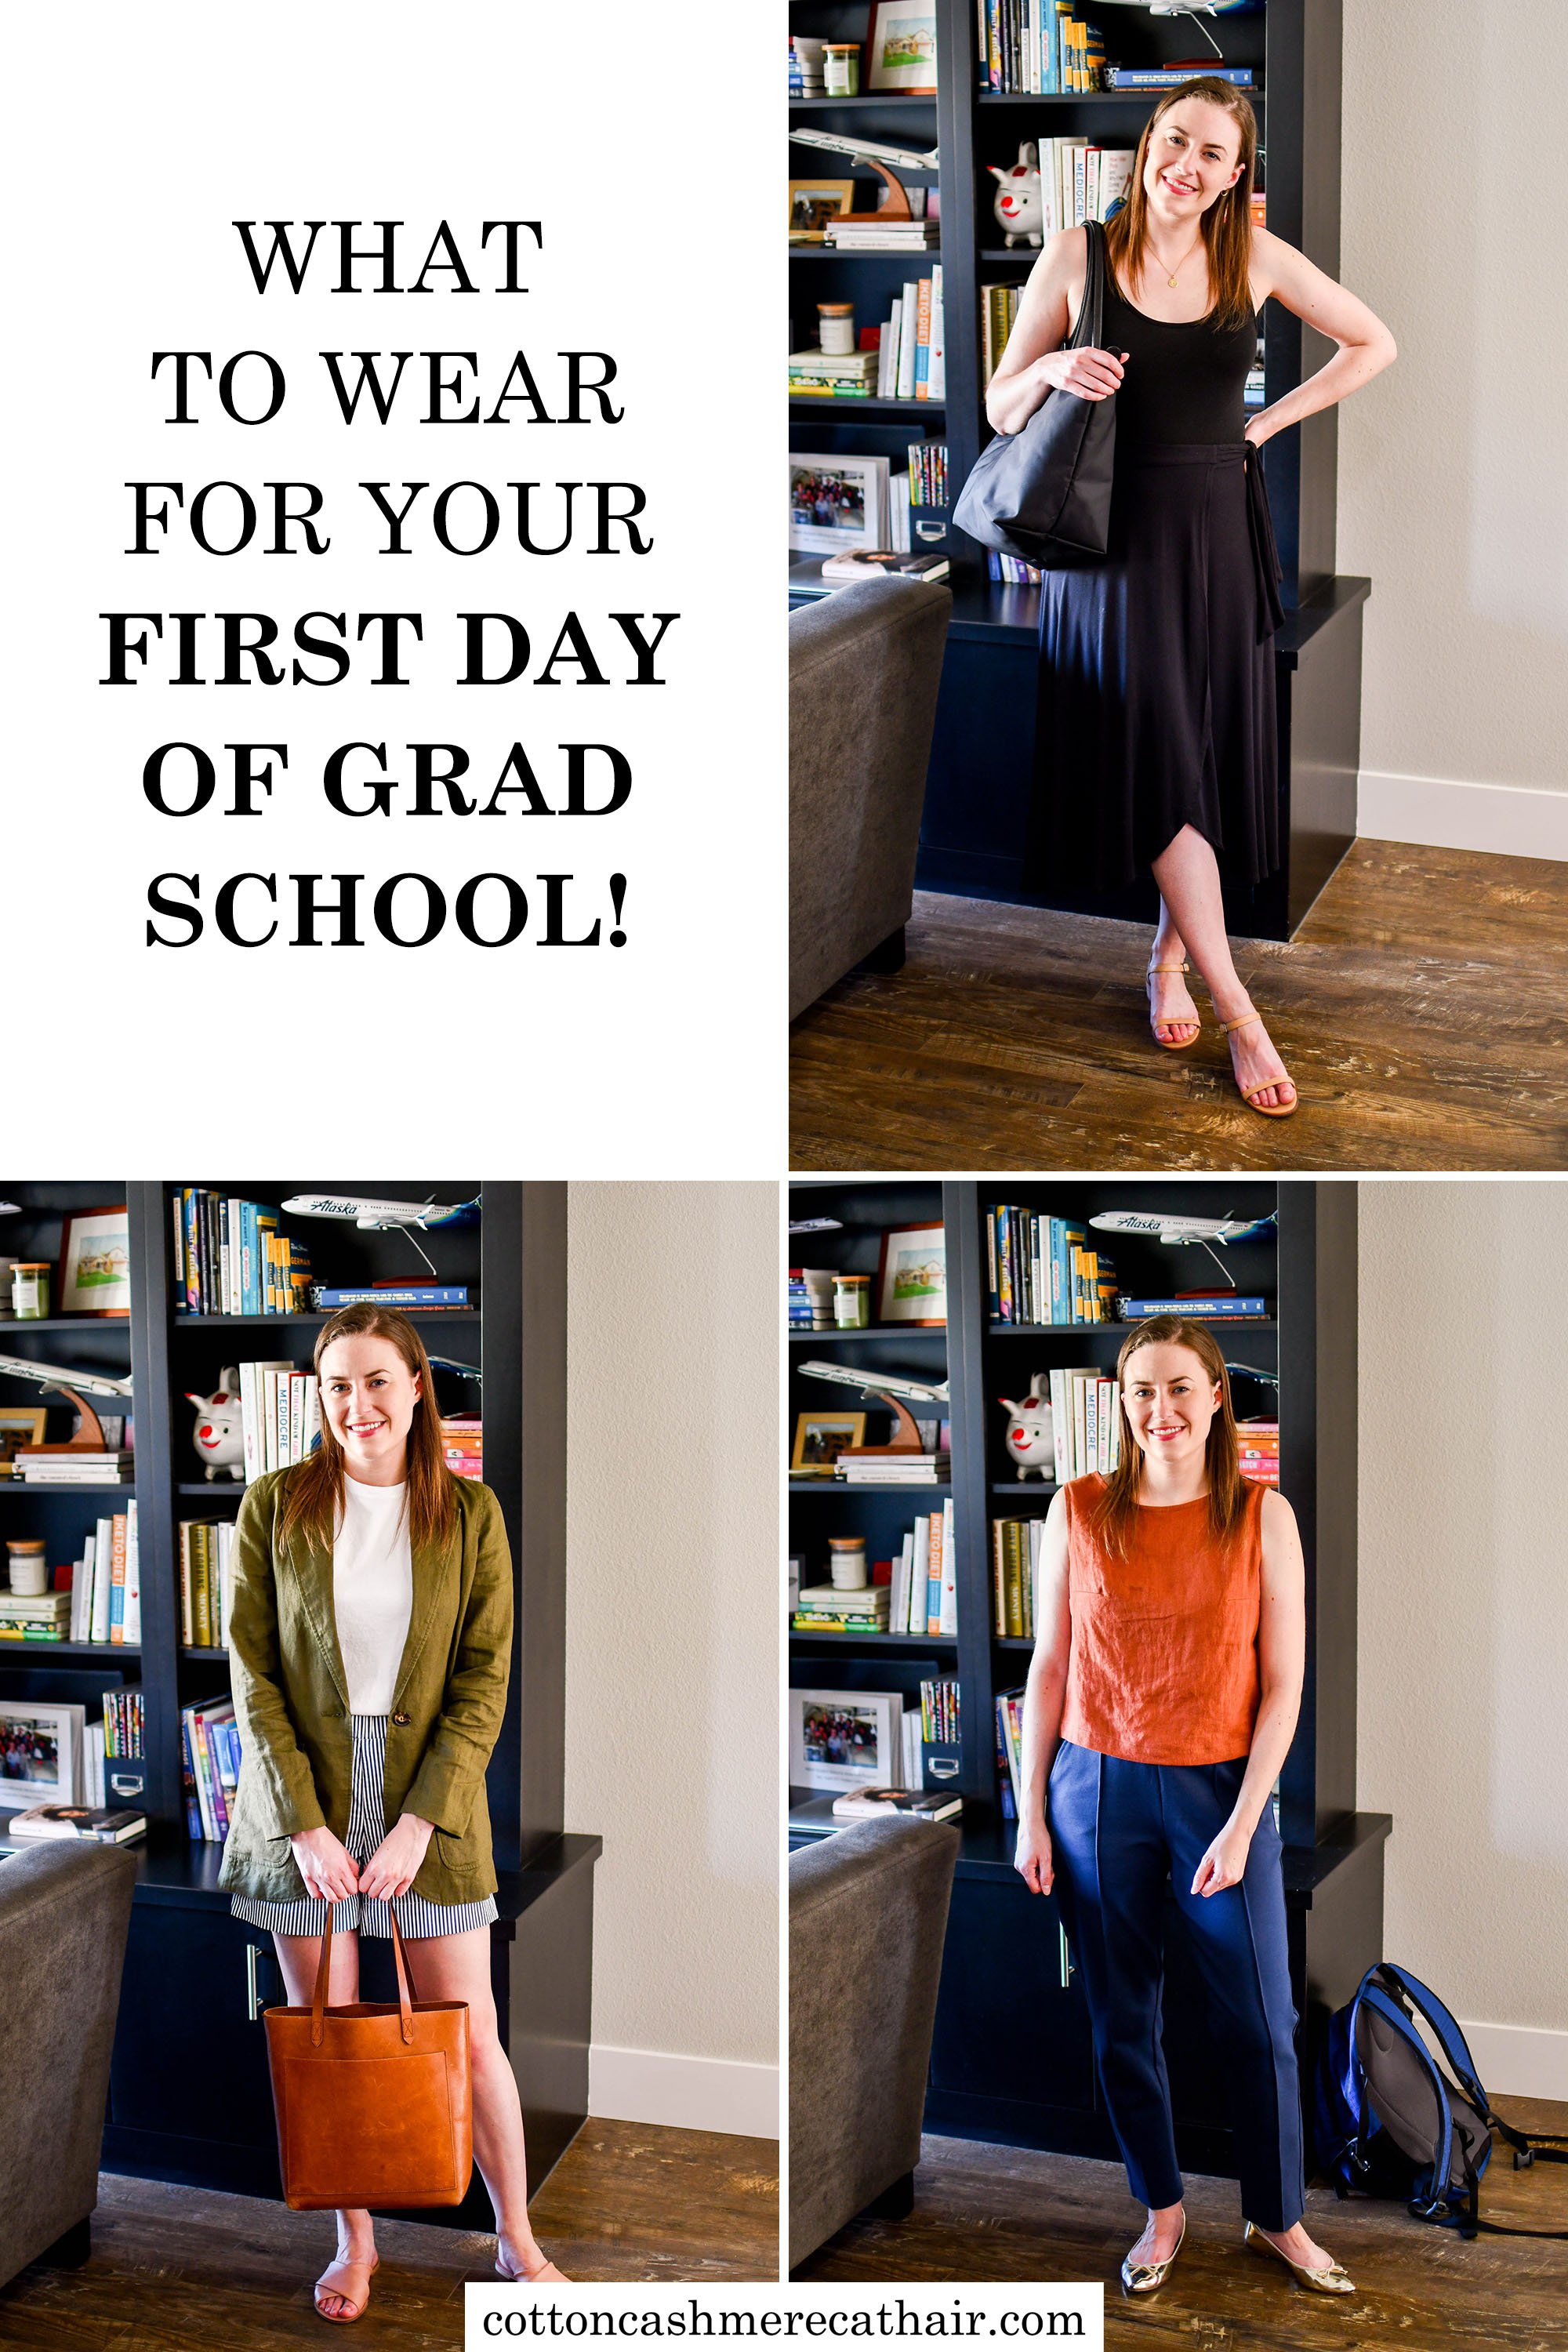 Grad School Outfit Ideas: What to Wear for Your First Day of School!